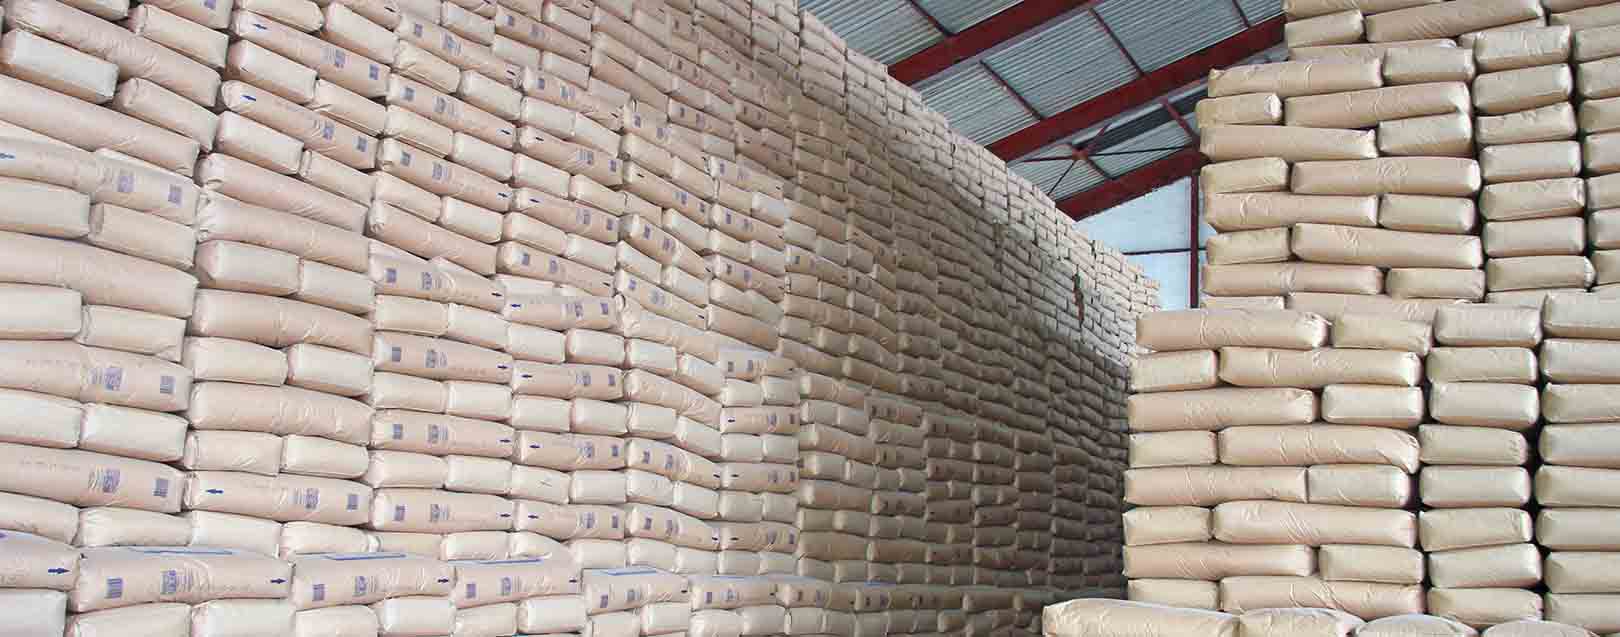 Sugar export from India increases, though the production is expected to fall